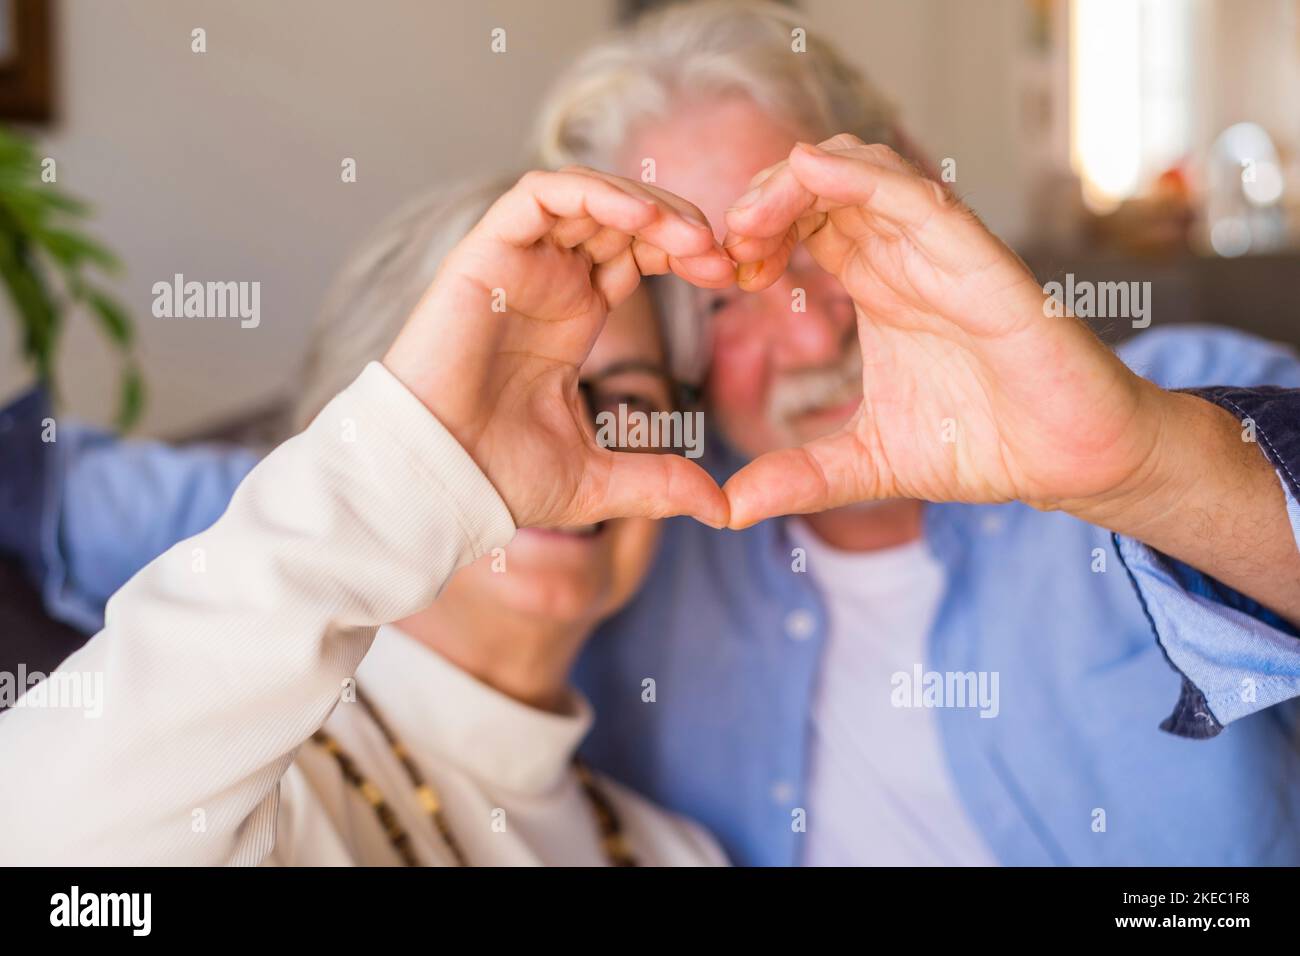 Couple of two old and happy seniors having fun at home on the sofa doing a heart shape with their hands and fingers looking at the camera. Stock Photo